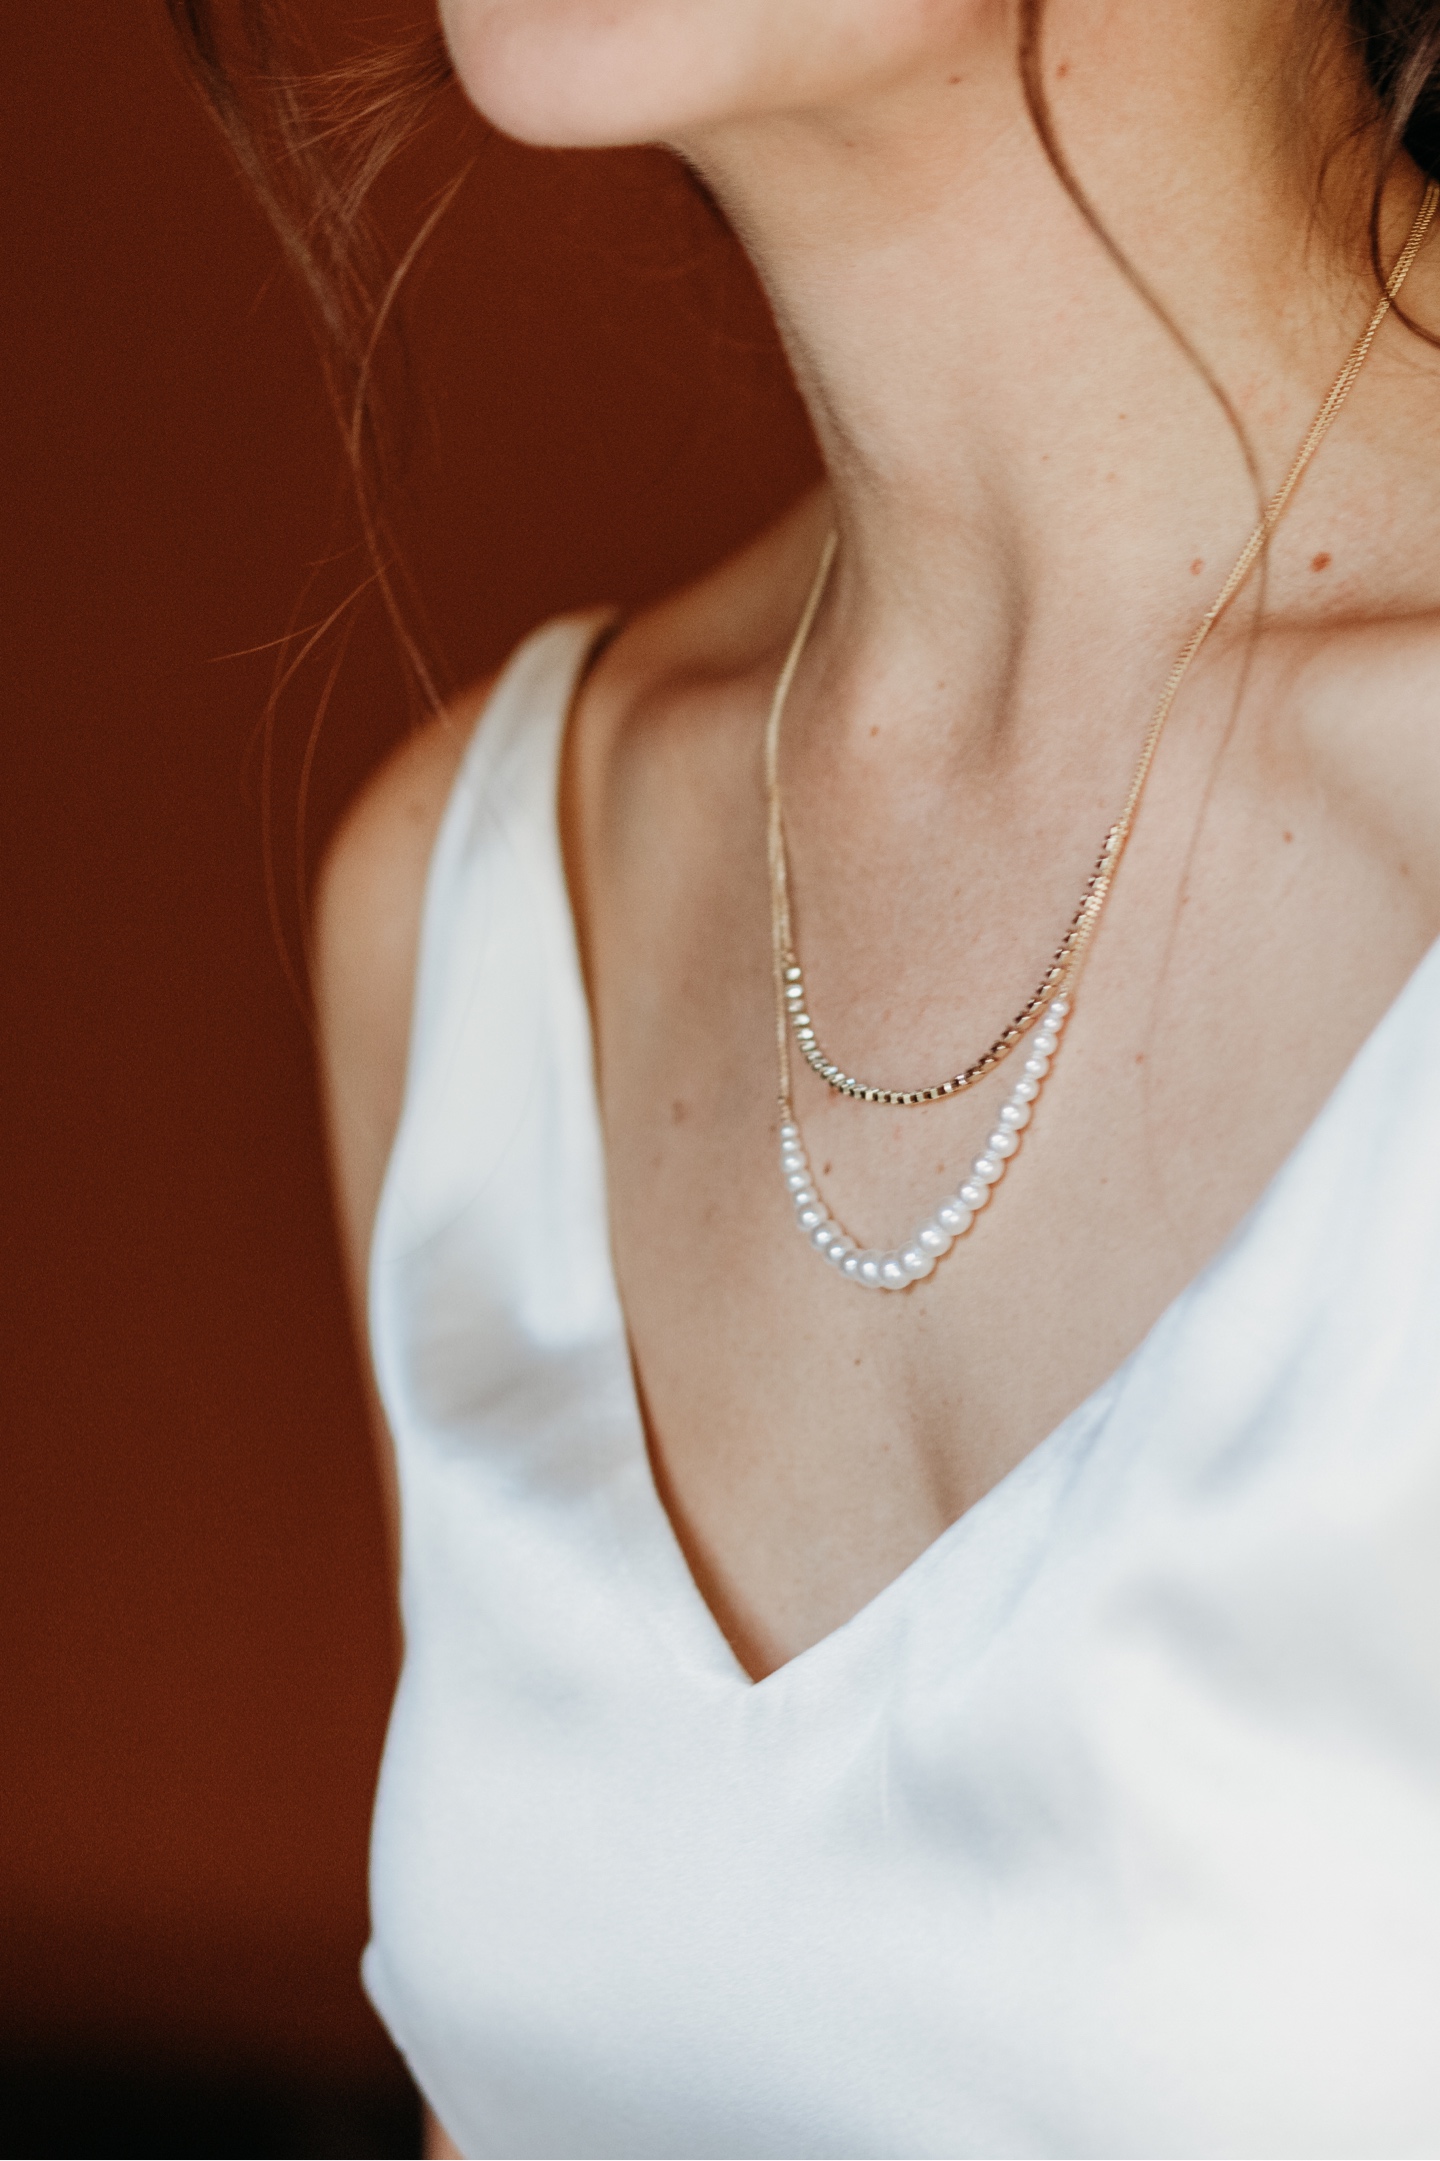 Close up of pearl and diamond necklace worn by the bride in her wedding dress. Sacramento wedding photography by Liz Koston.